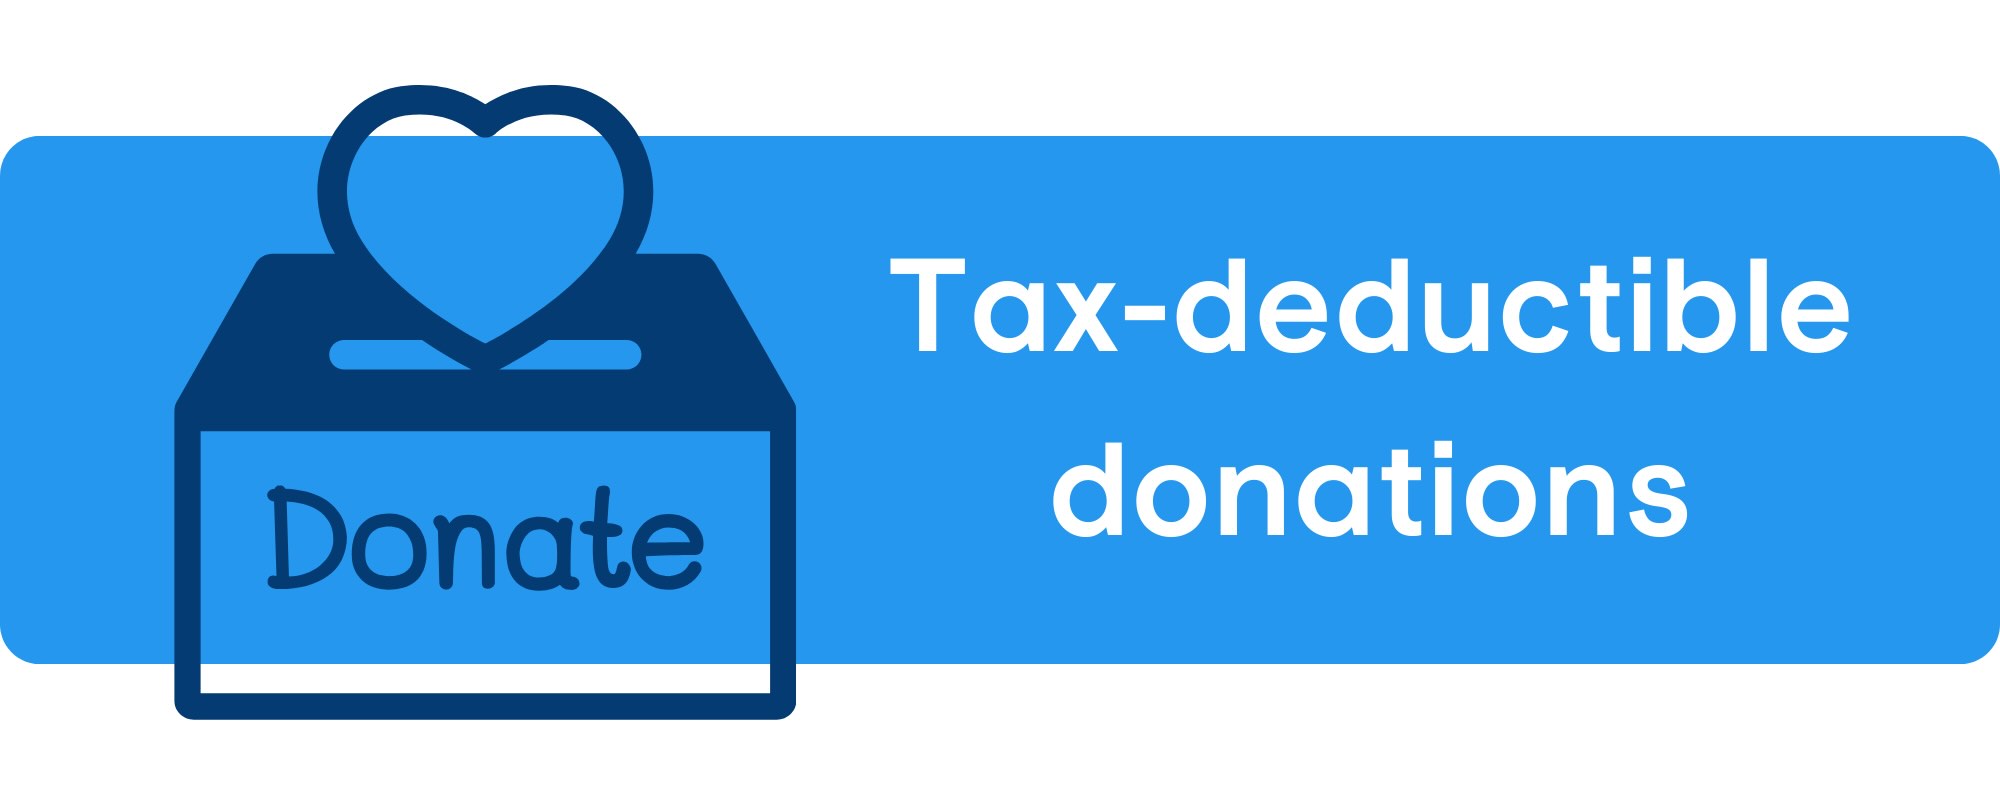 Churches apply for 501c3 status so they can operate without paying federal income tax and to allow donors to make tax-deductible contributions